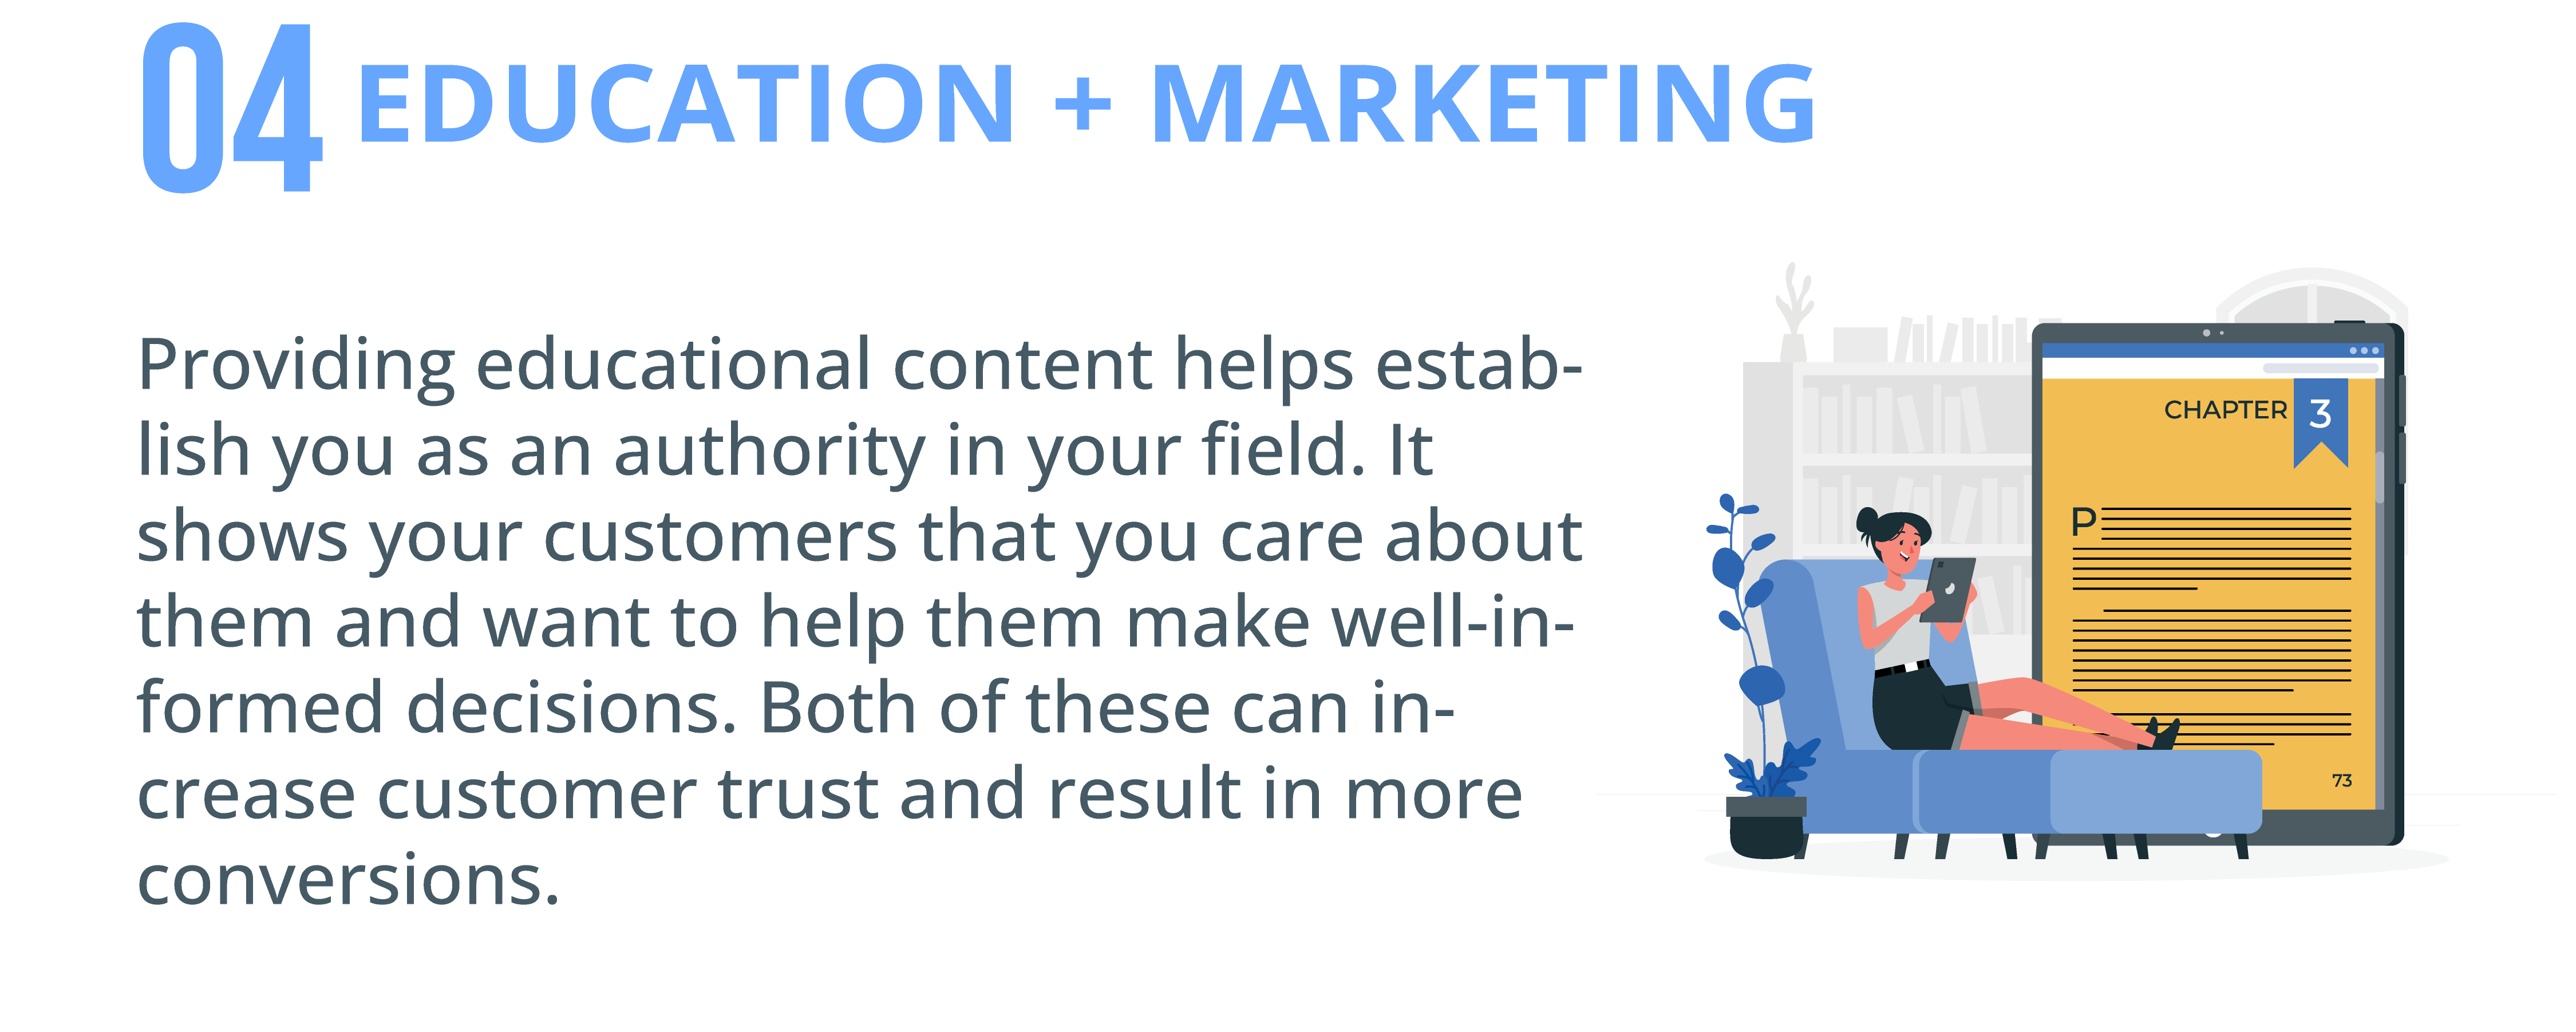 Educational Marketing to improve Customers understanding of your industry